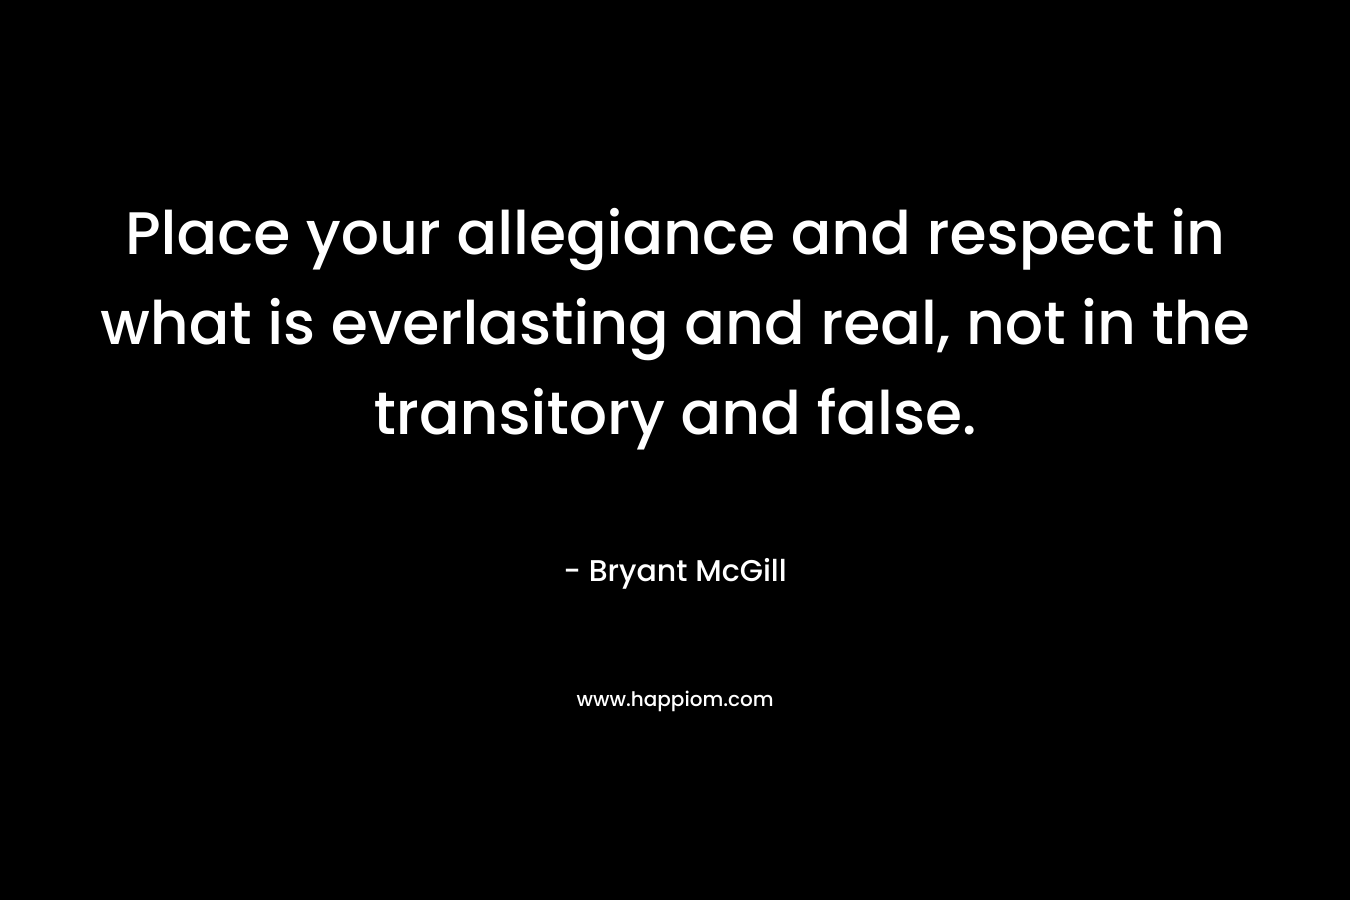 Place your allegiance and respect in what is everlasting and real, not in the transitory and false. – Bryant McGill